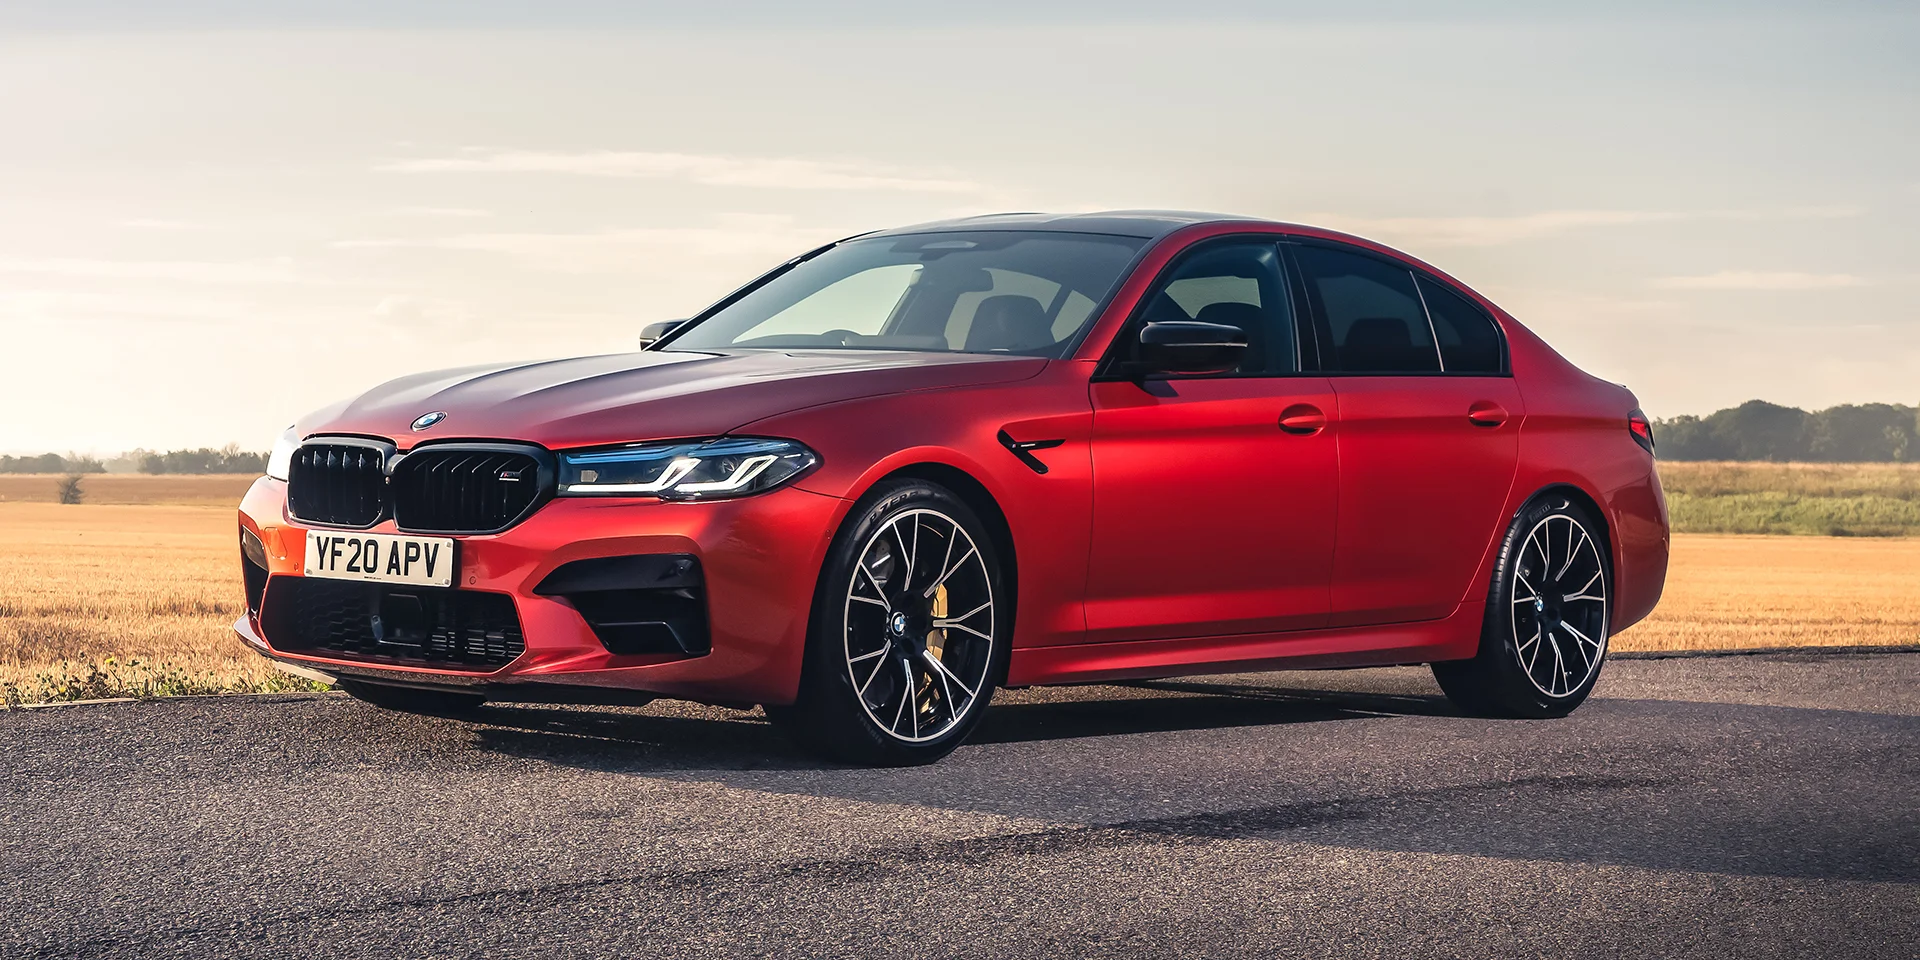 2023 BMW M5 CS review: nonsensical on paper, sublime in practice